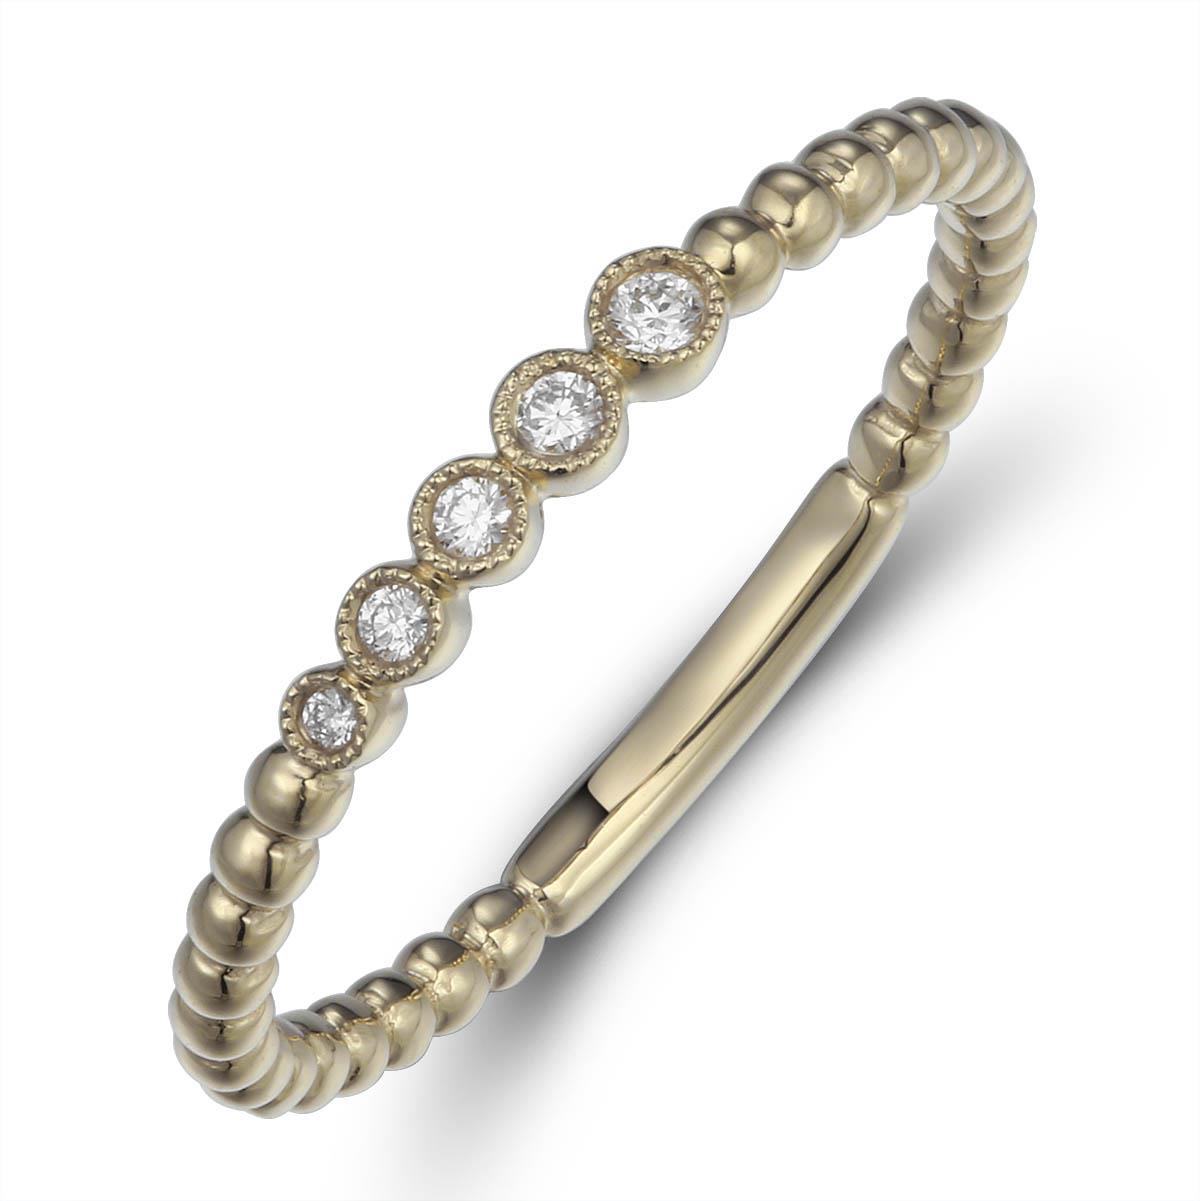 PRIVE 18K YELLOW GOLD 0.06CT DIAMOND STACKABLE BAND